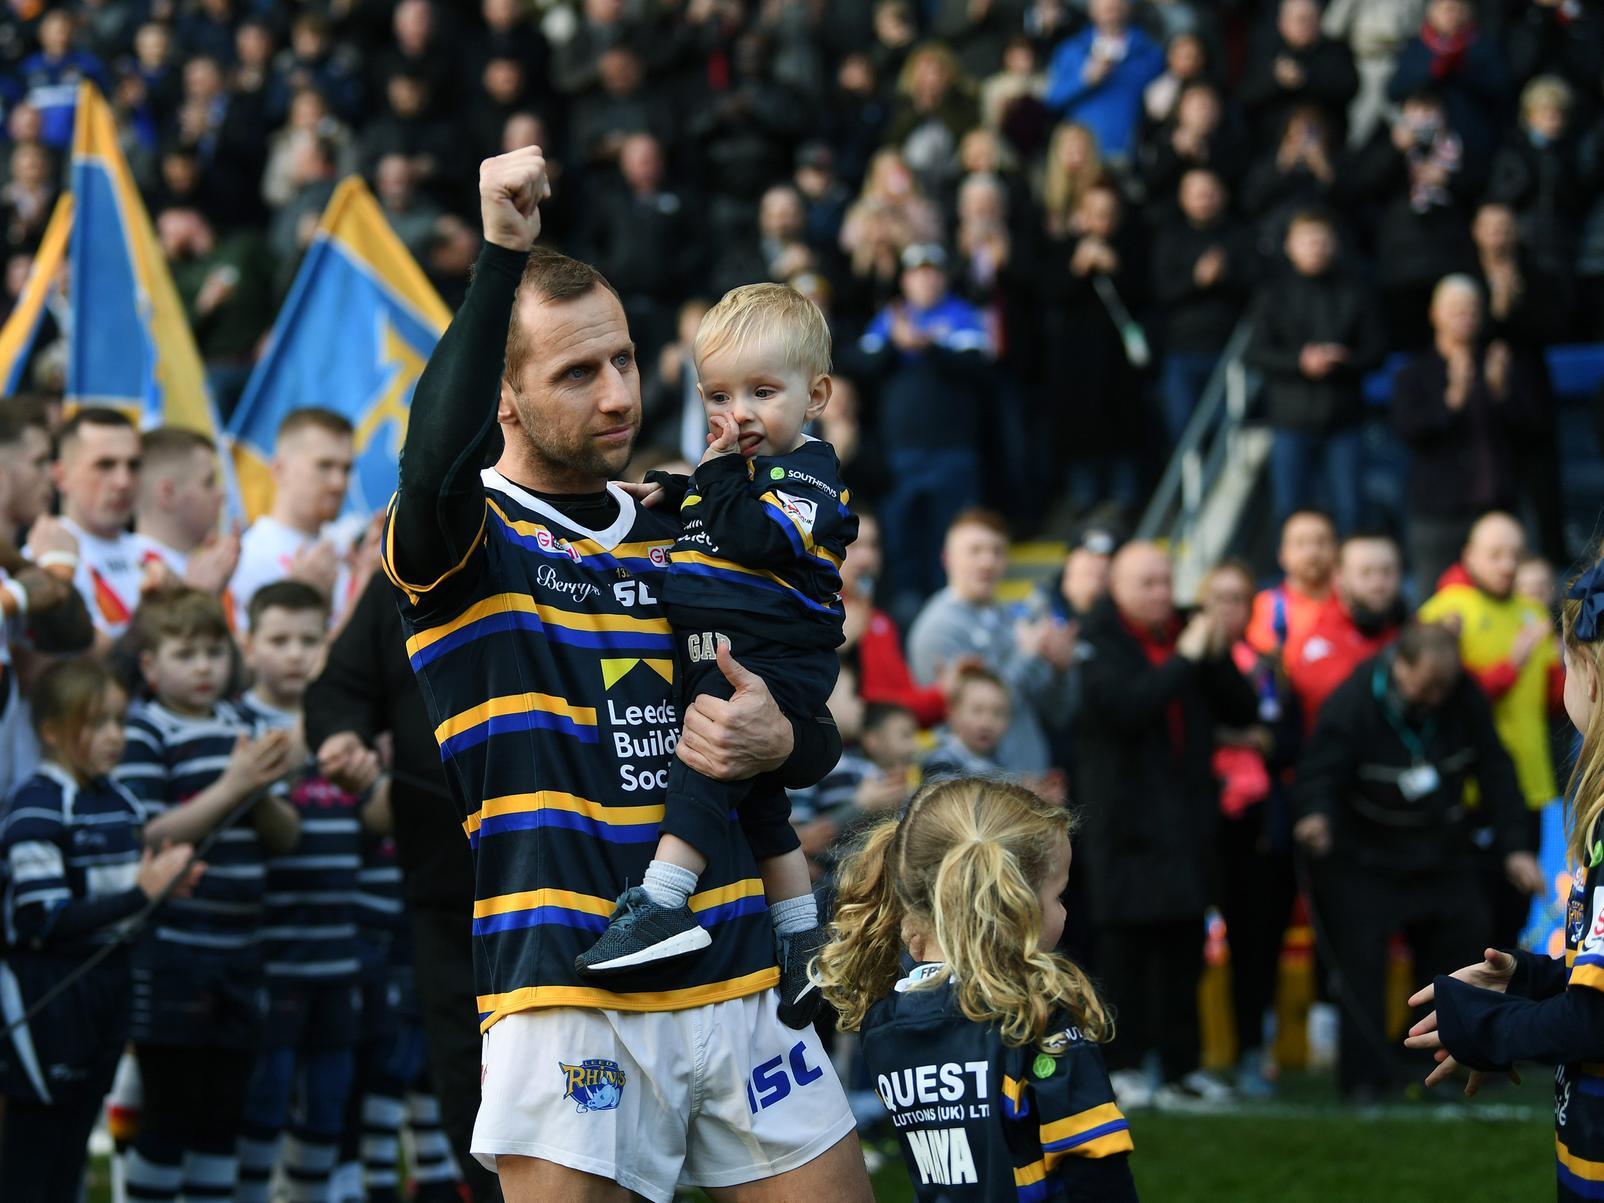 There were huge cheers from the crowd as Burrow joined the game. Rhinos 34 - Bradford Bulls 10.